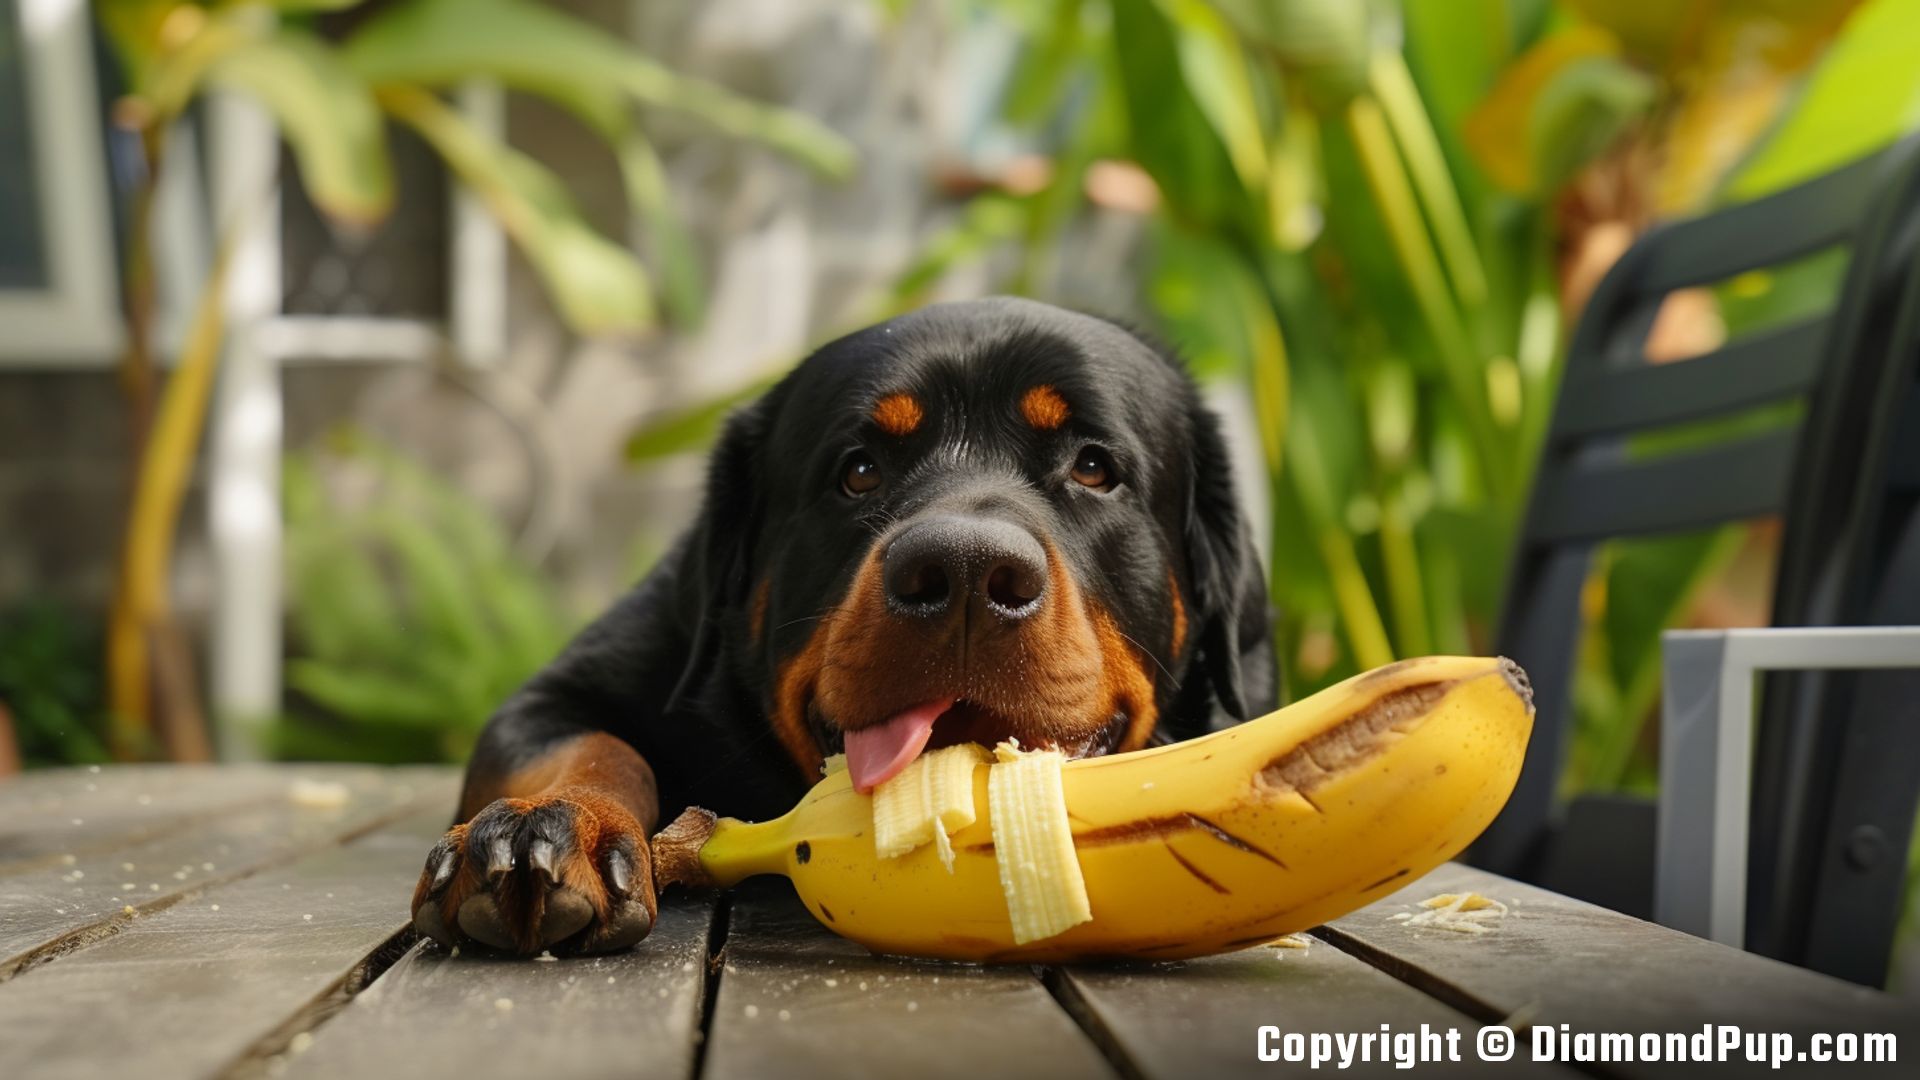 Image of a Playful Rottweiler Snacking on Banana